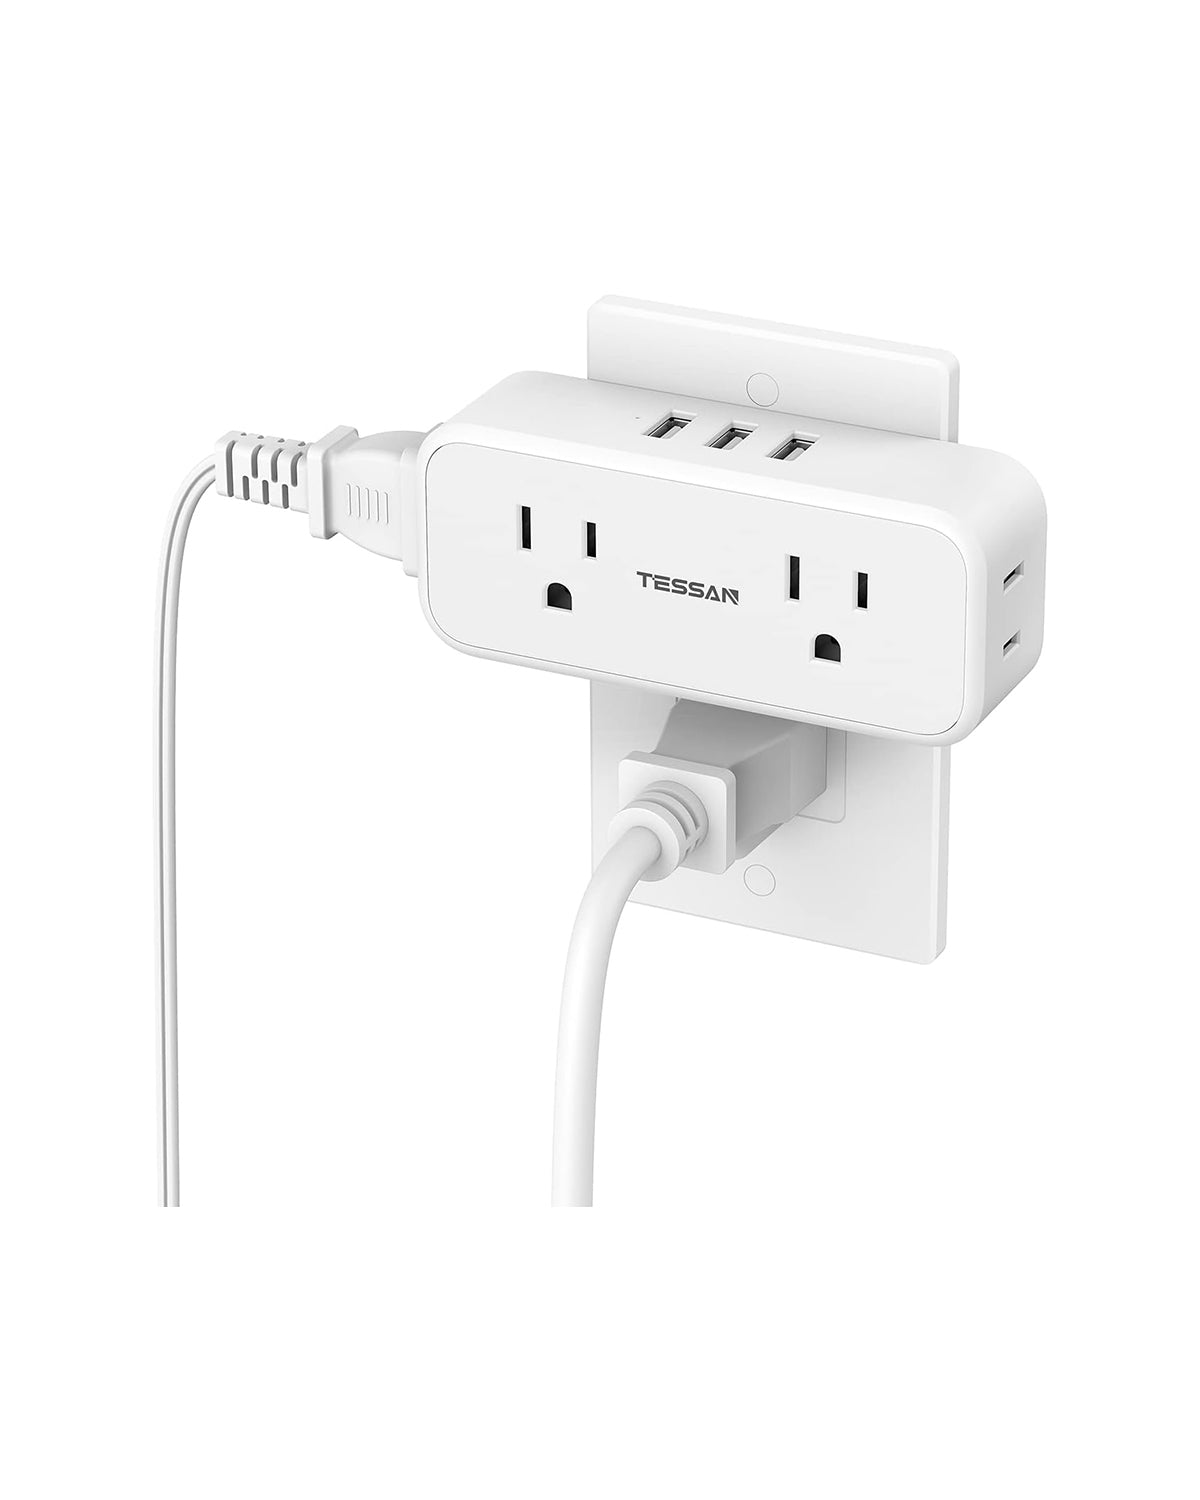 TESSAN 4 Electrical Multiple Outlet Extender with 3 USB Ports, Multi Plug Outlet Splitter with USB